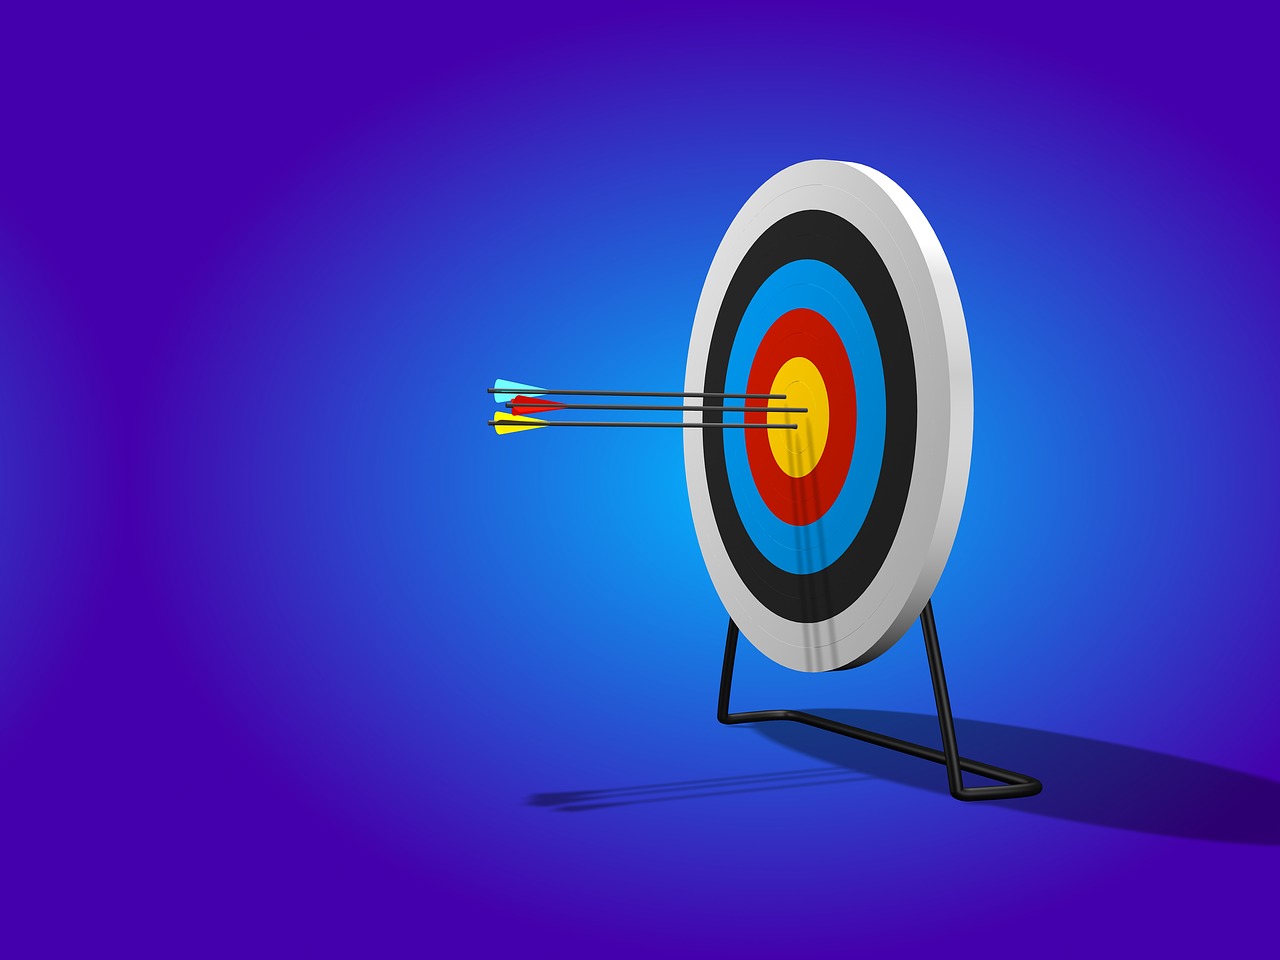 B2B marketing is about targeting